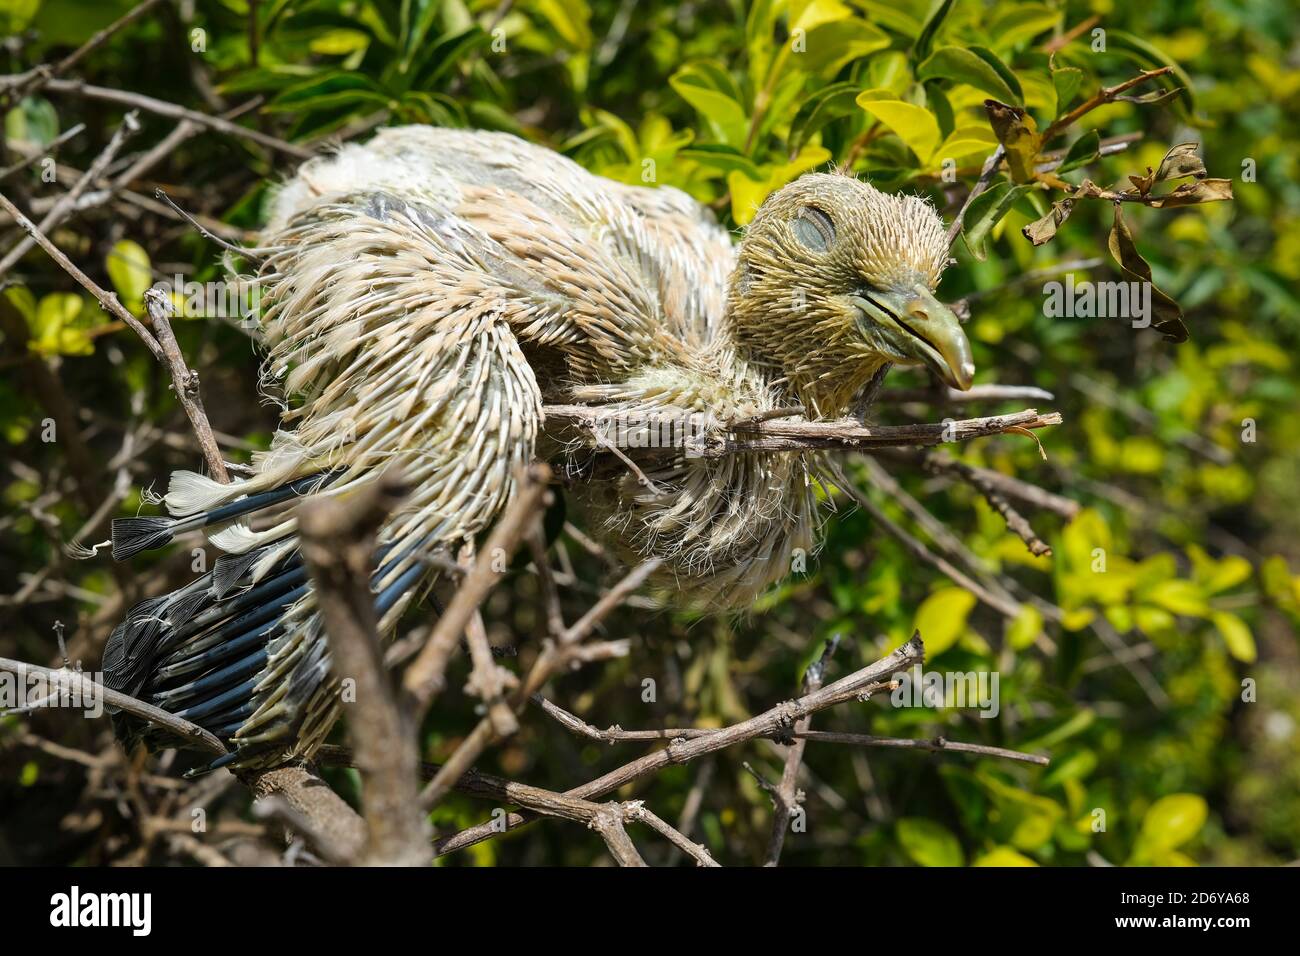 Dead hatchling fallen from the nest. Stock Photo